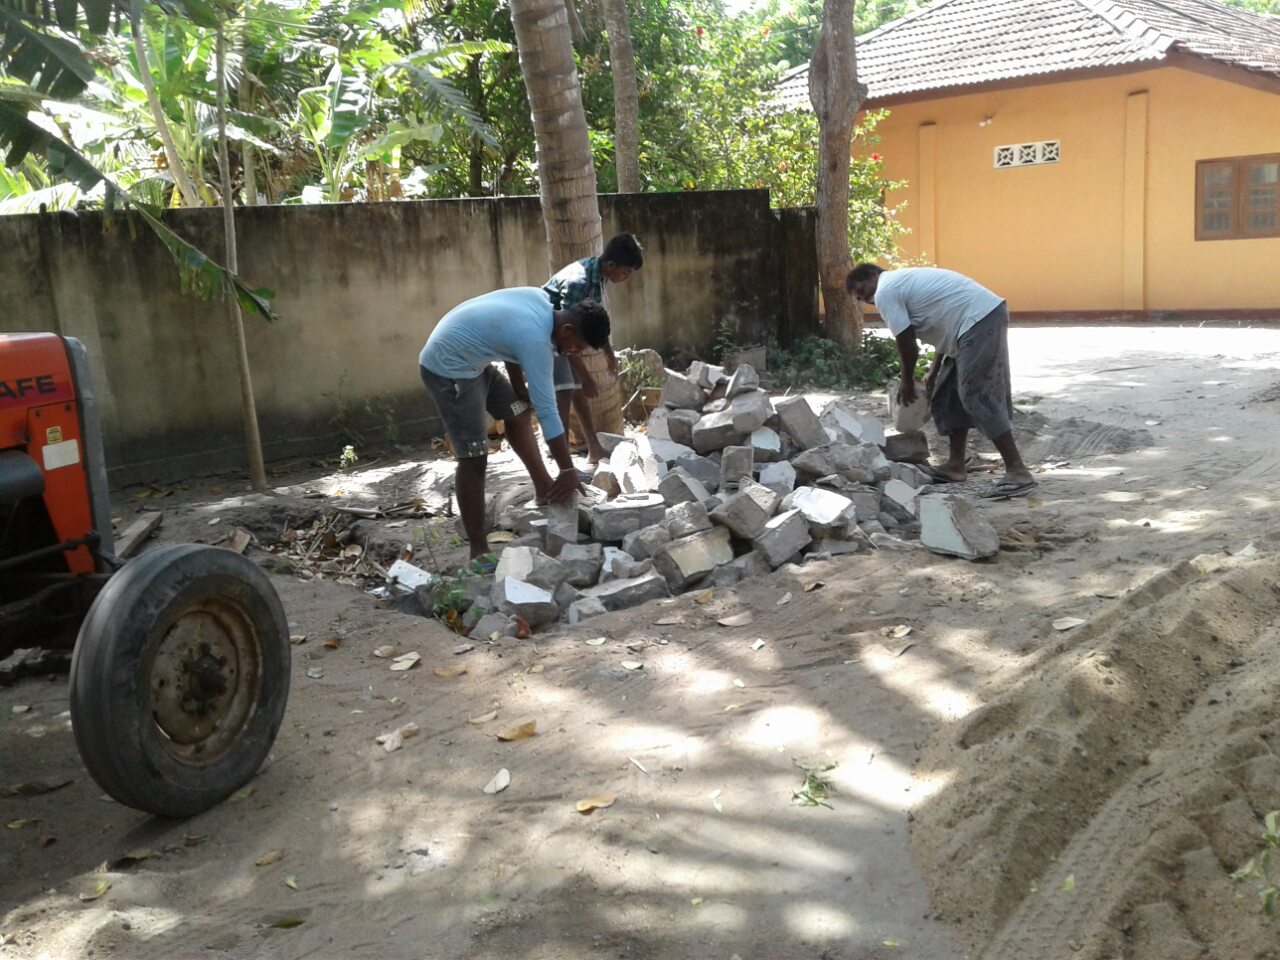 Provided infrastructure support for a Hostel